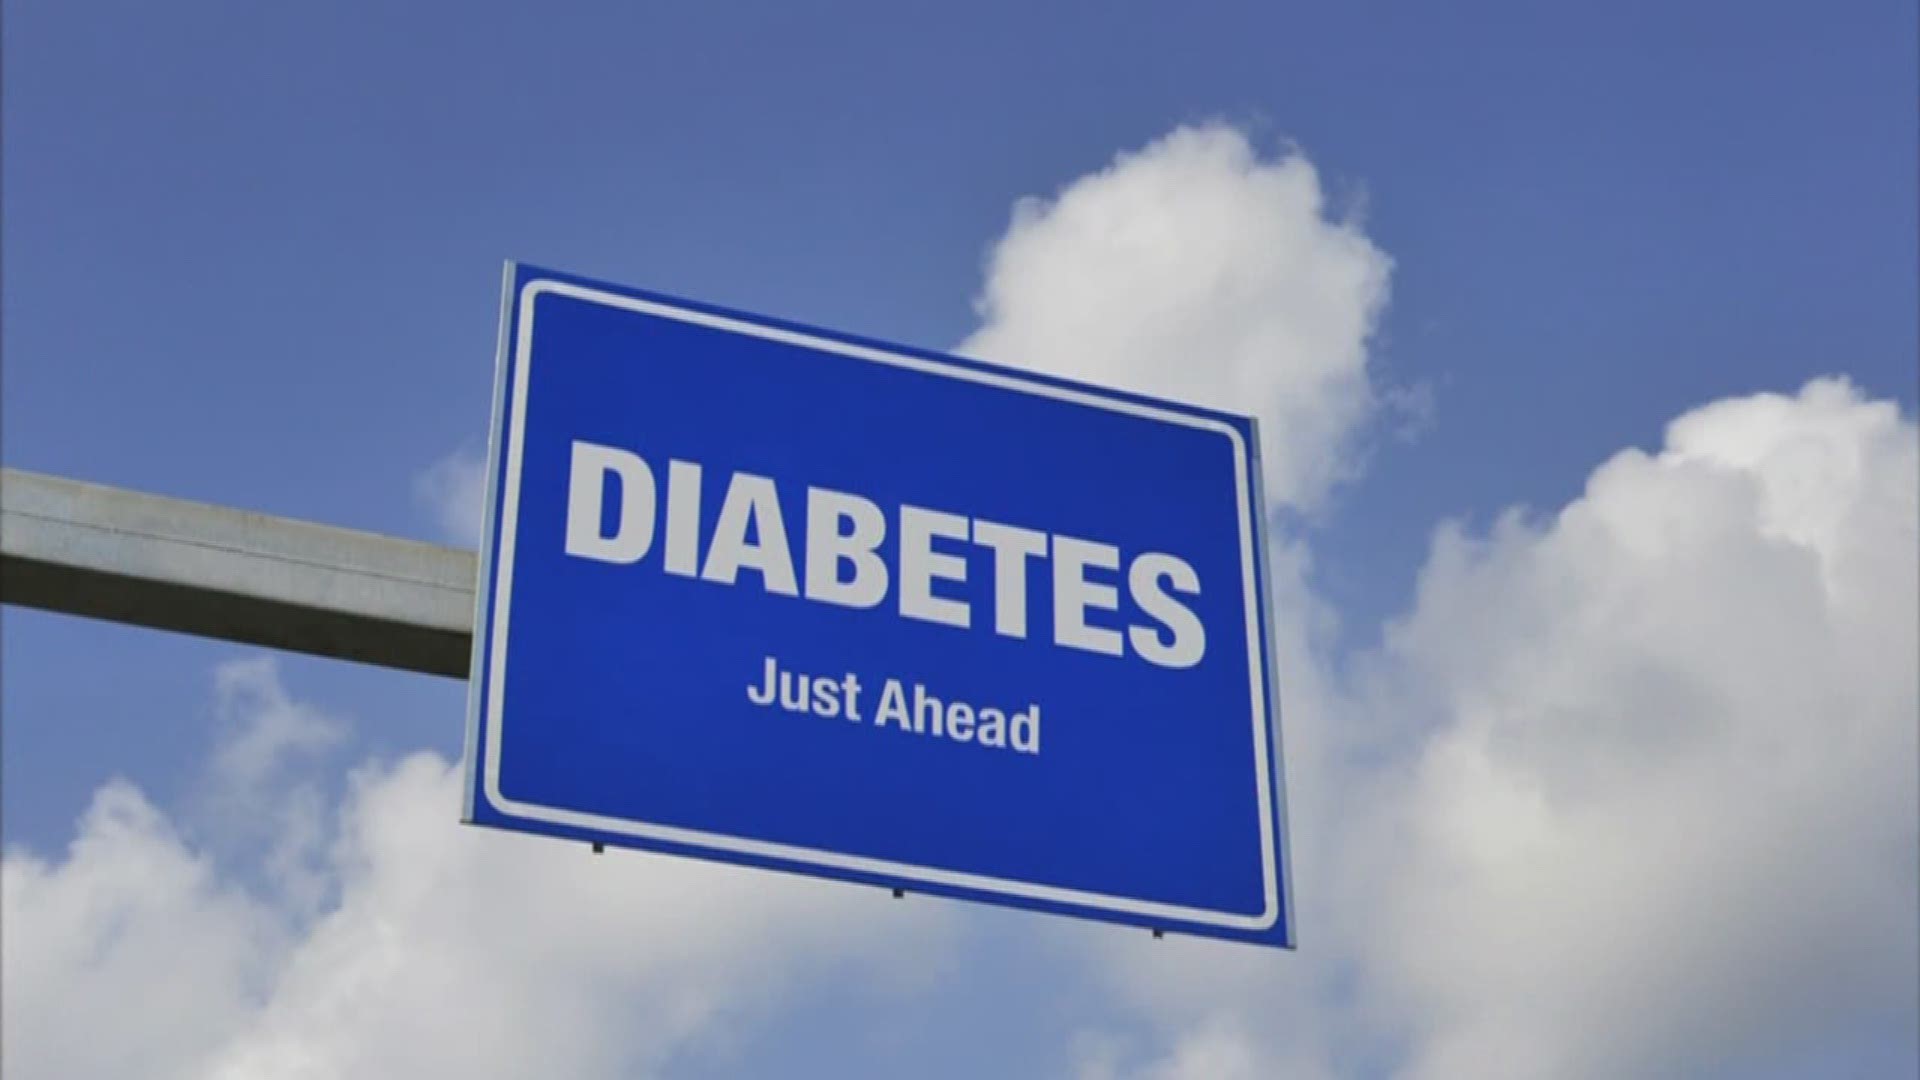 In South Texas, thousands of adults are walking around having no idea they could be at risk to become diabetic. A study currently underway at the Clinical Trials of Texas aims to combat diabetes by attacking in the pre-diabetic stage.